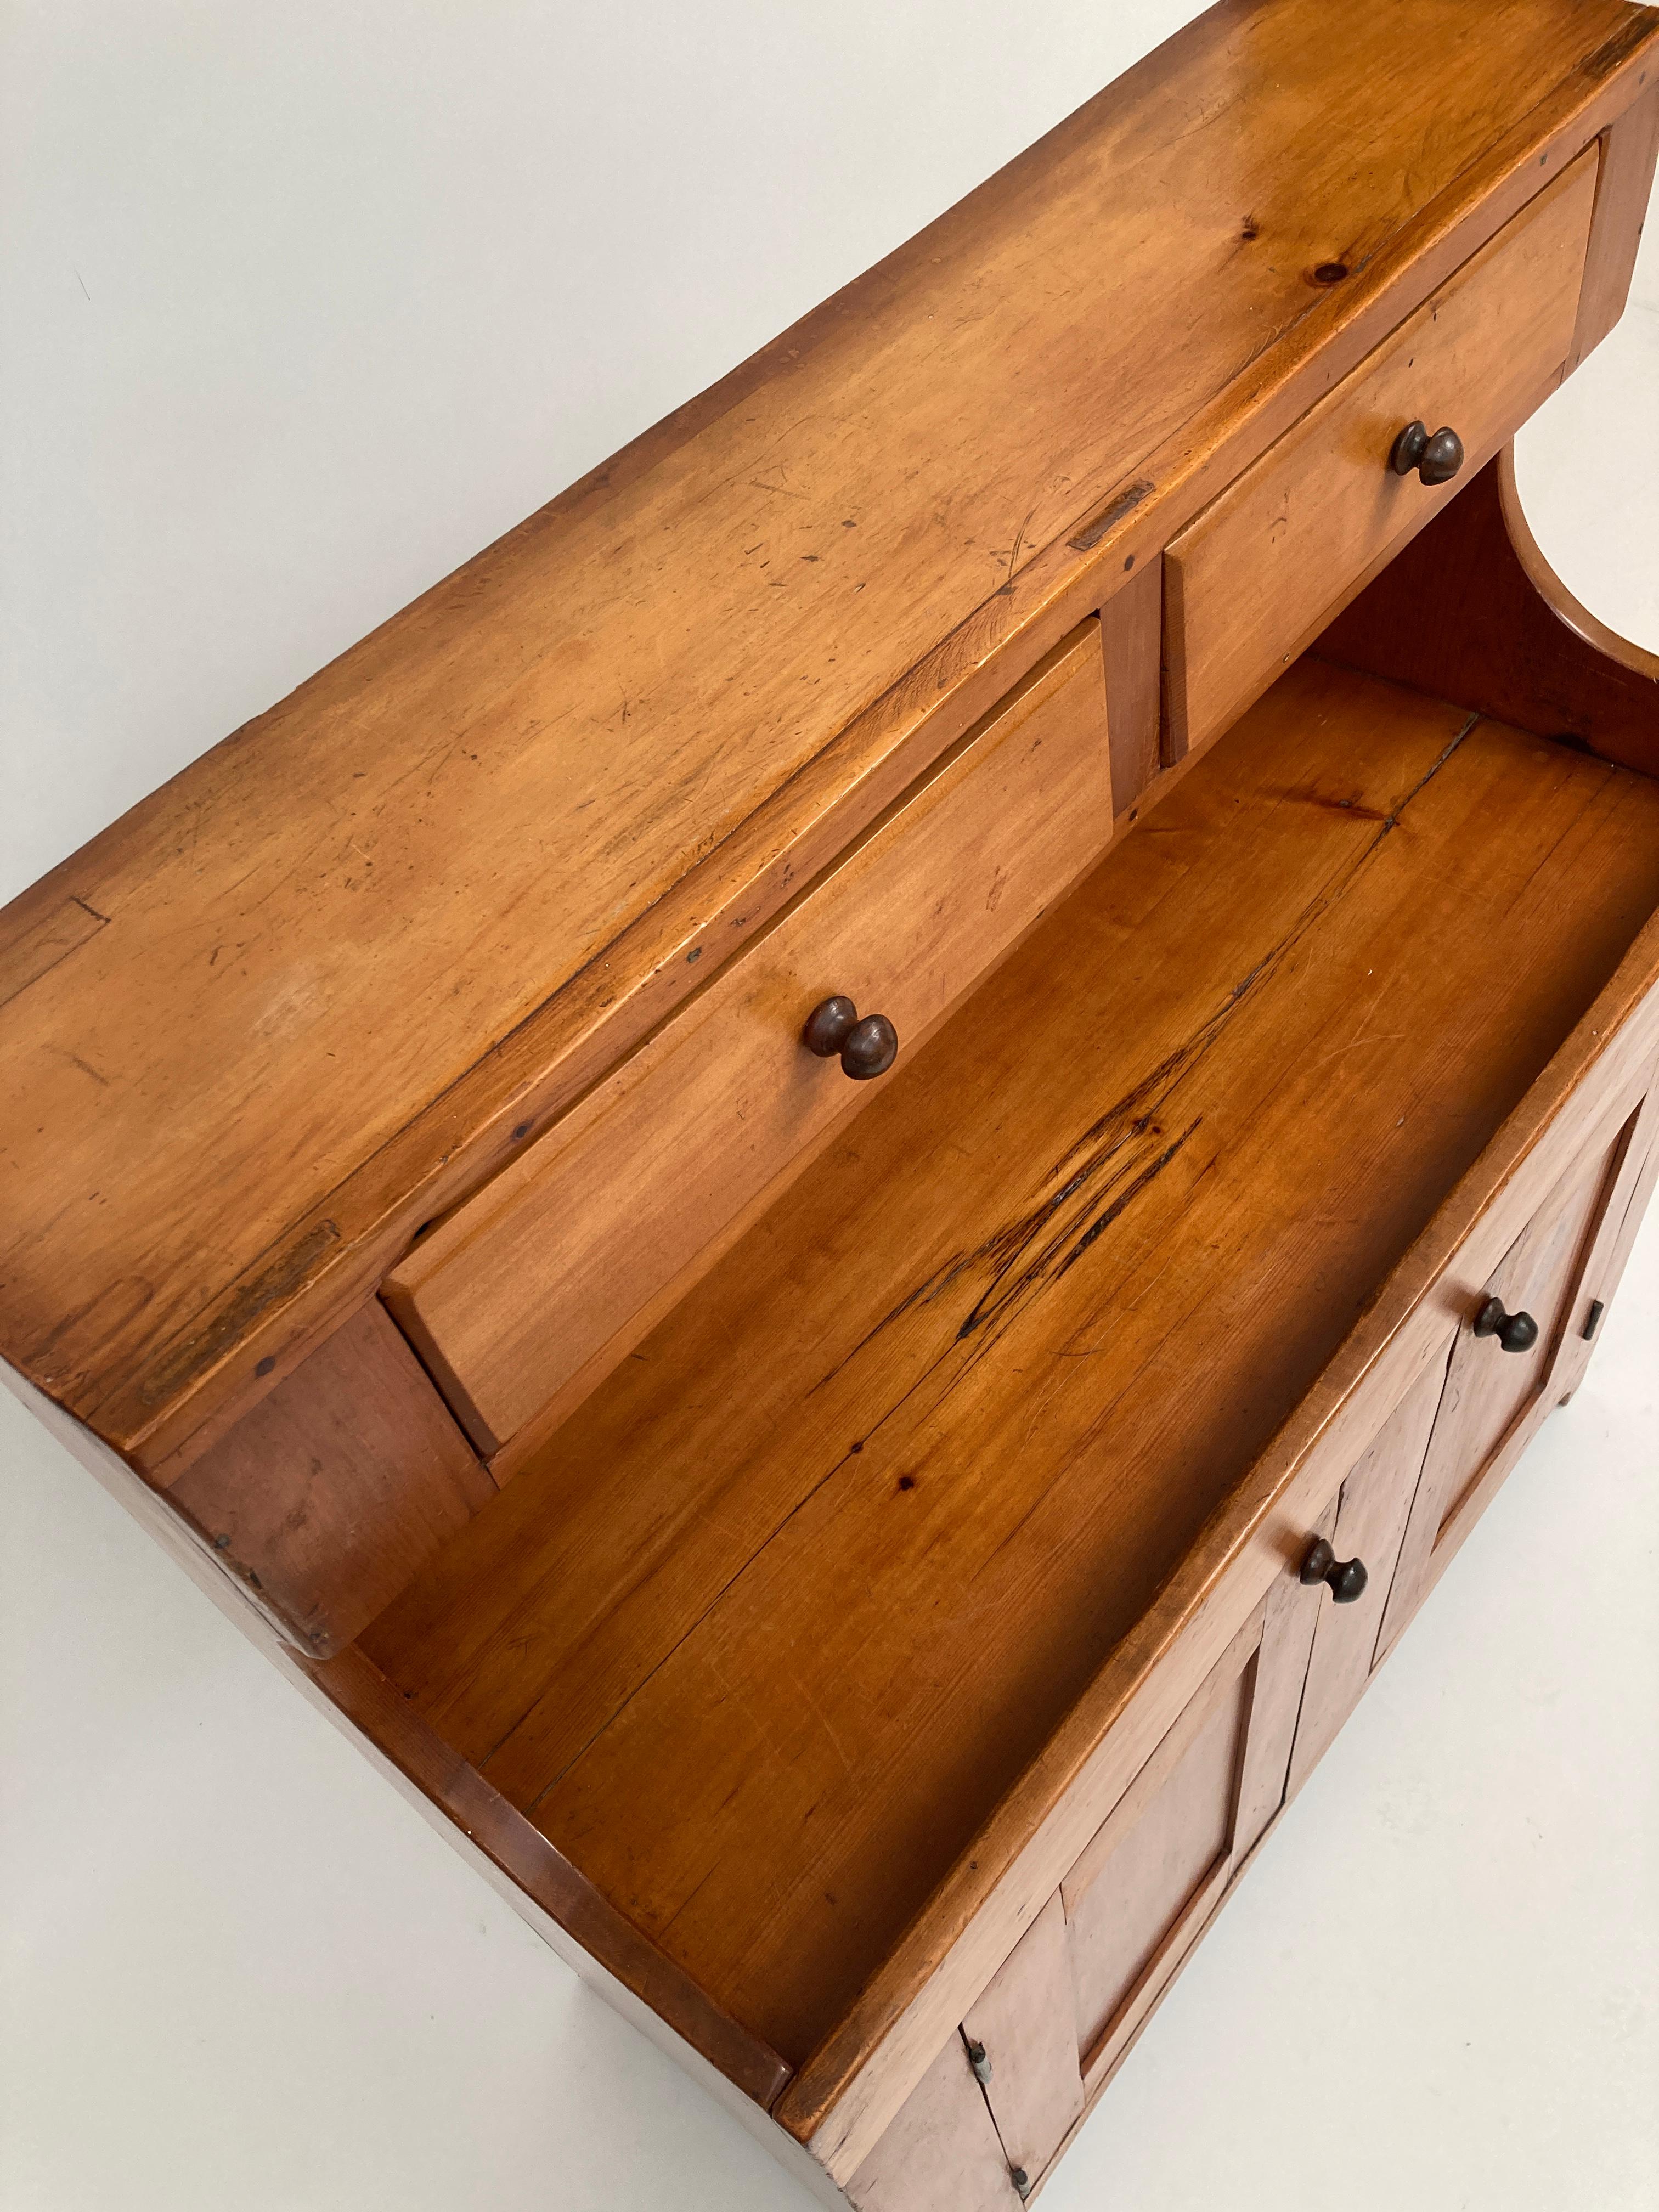 Hand-Carved Early American Country Pine Primitive Dry Sink, Late 18th Century For Sale